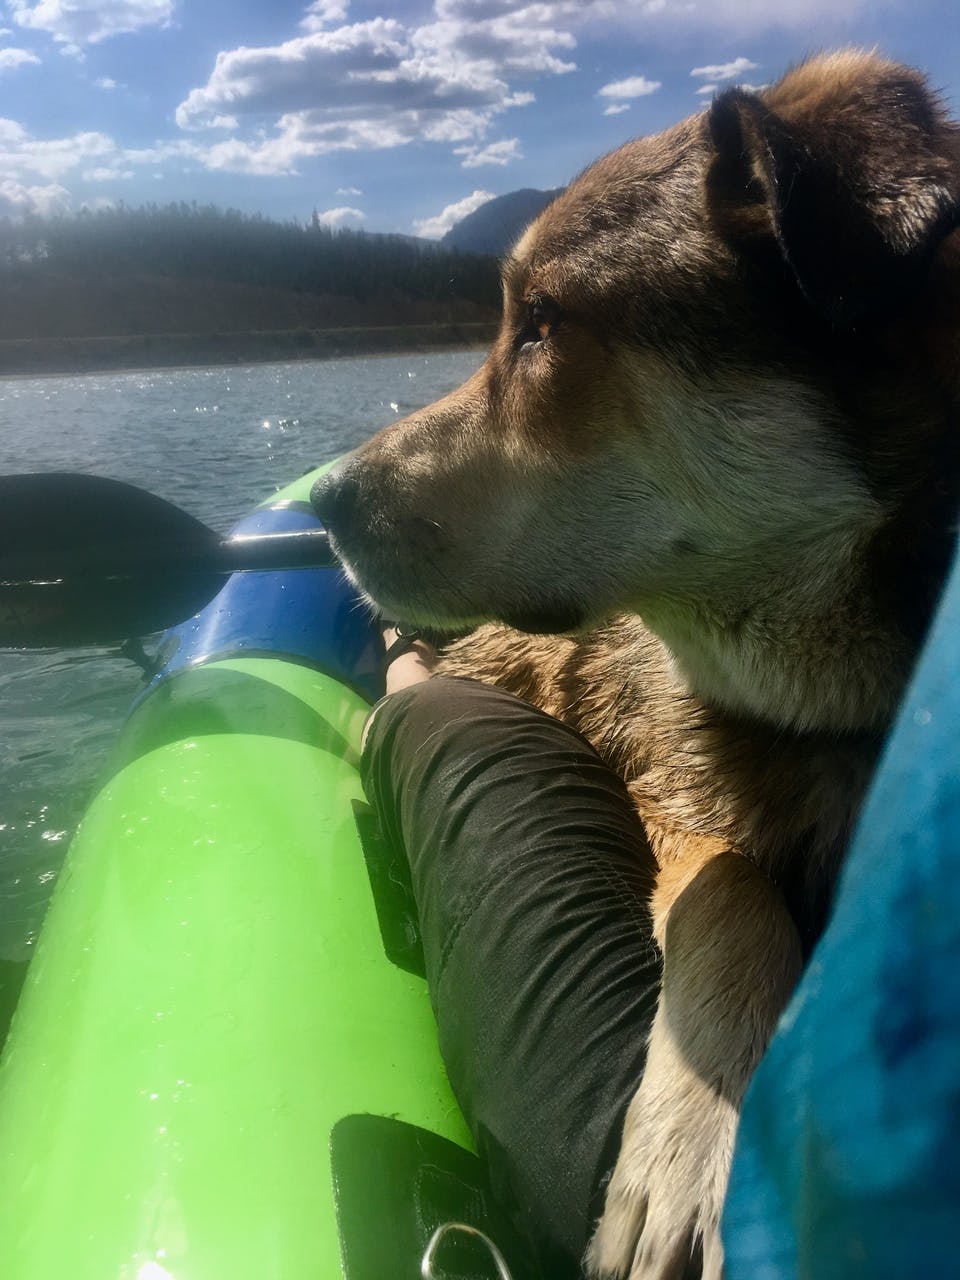 Alison Koziol: &#x201C;Look mom, I&#x2019;m a boat dog!: Dudley&#x2019;s first time in the packraft.&#x201D;